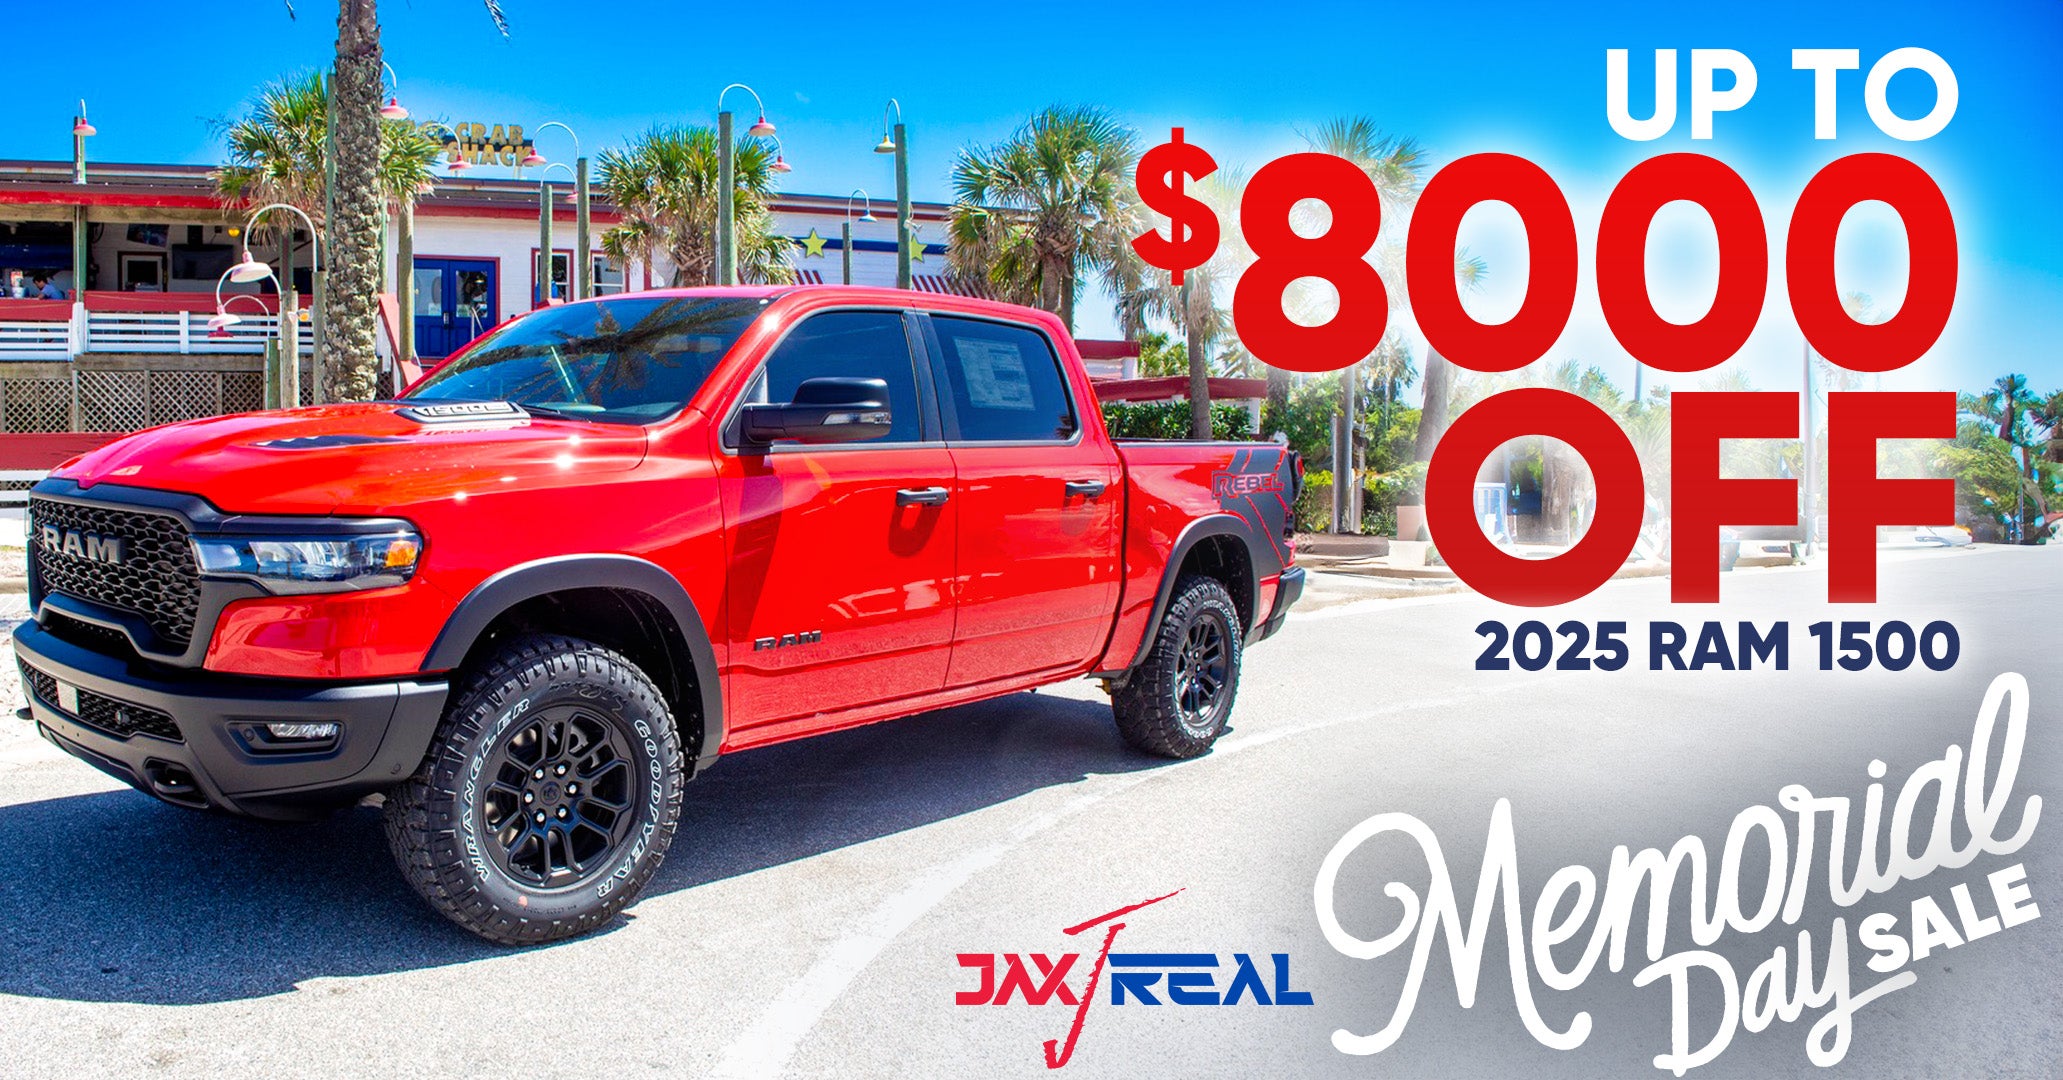 Up To $8000 Off 2025 RAM 1500